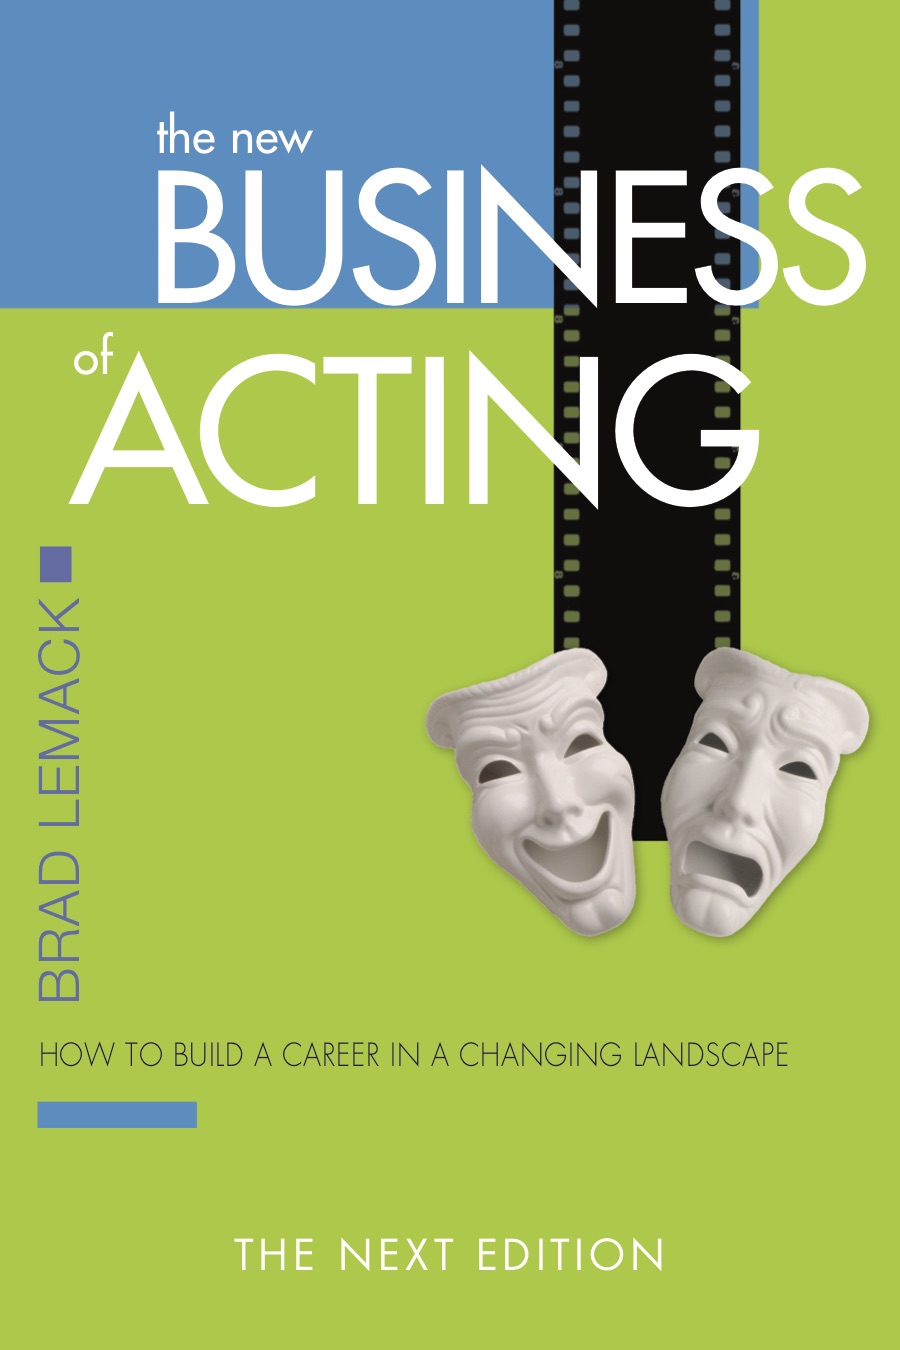 The New Business of Acting